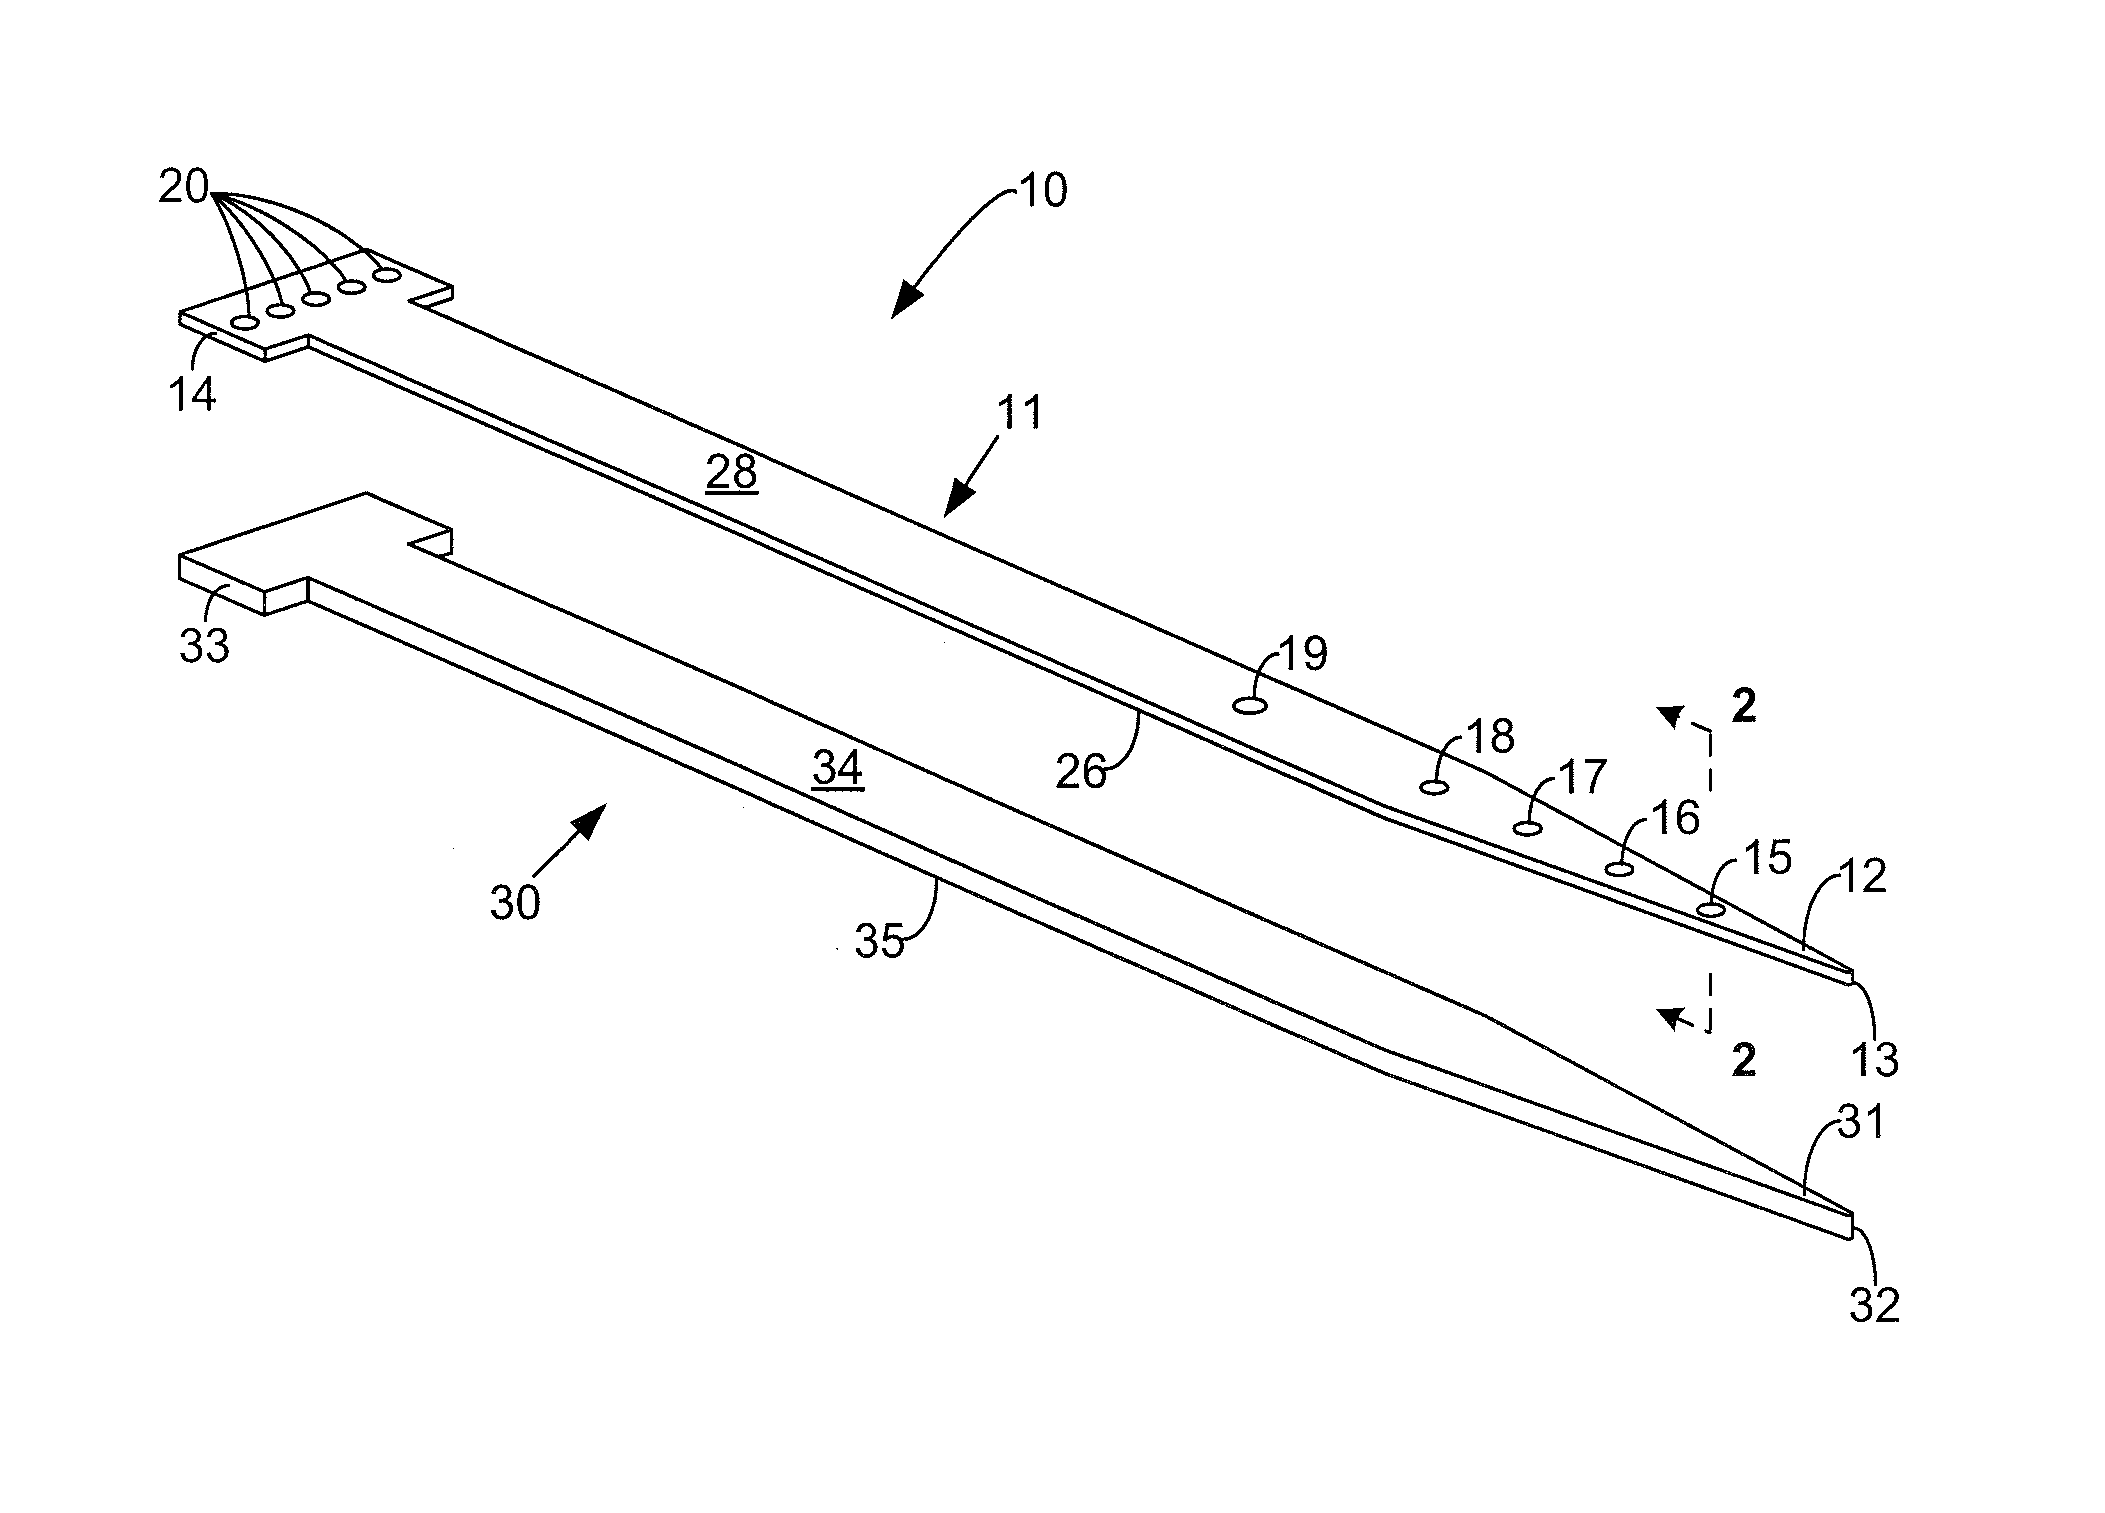 Rigid spine reinforced polymer microelectrode array probe and method of fabrication